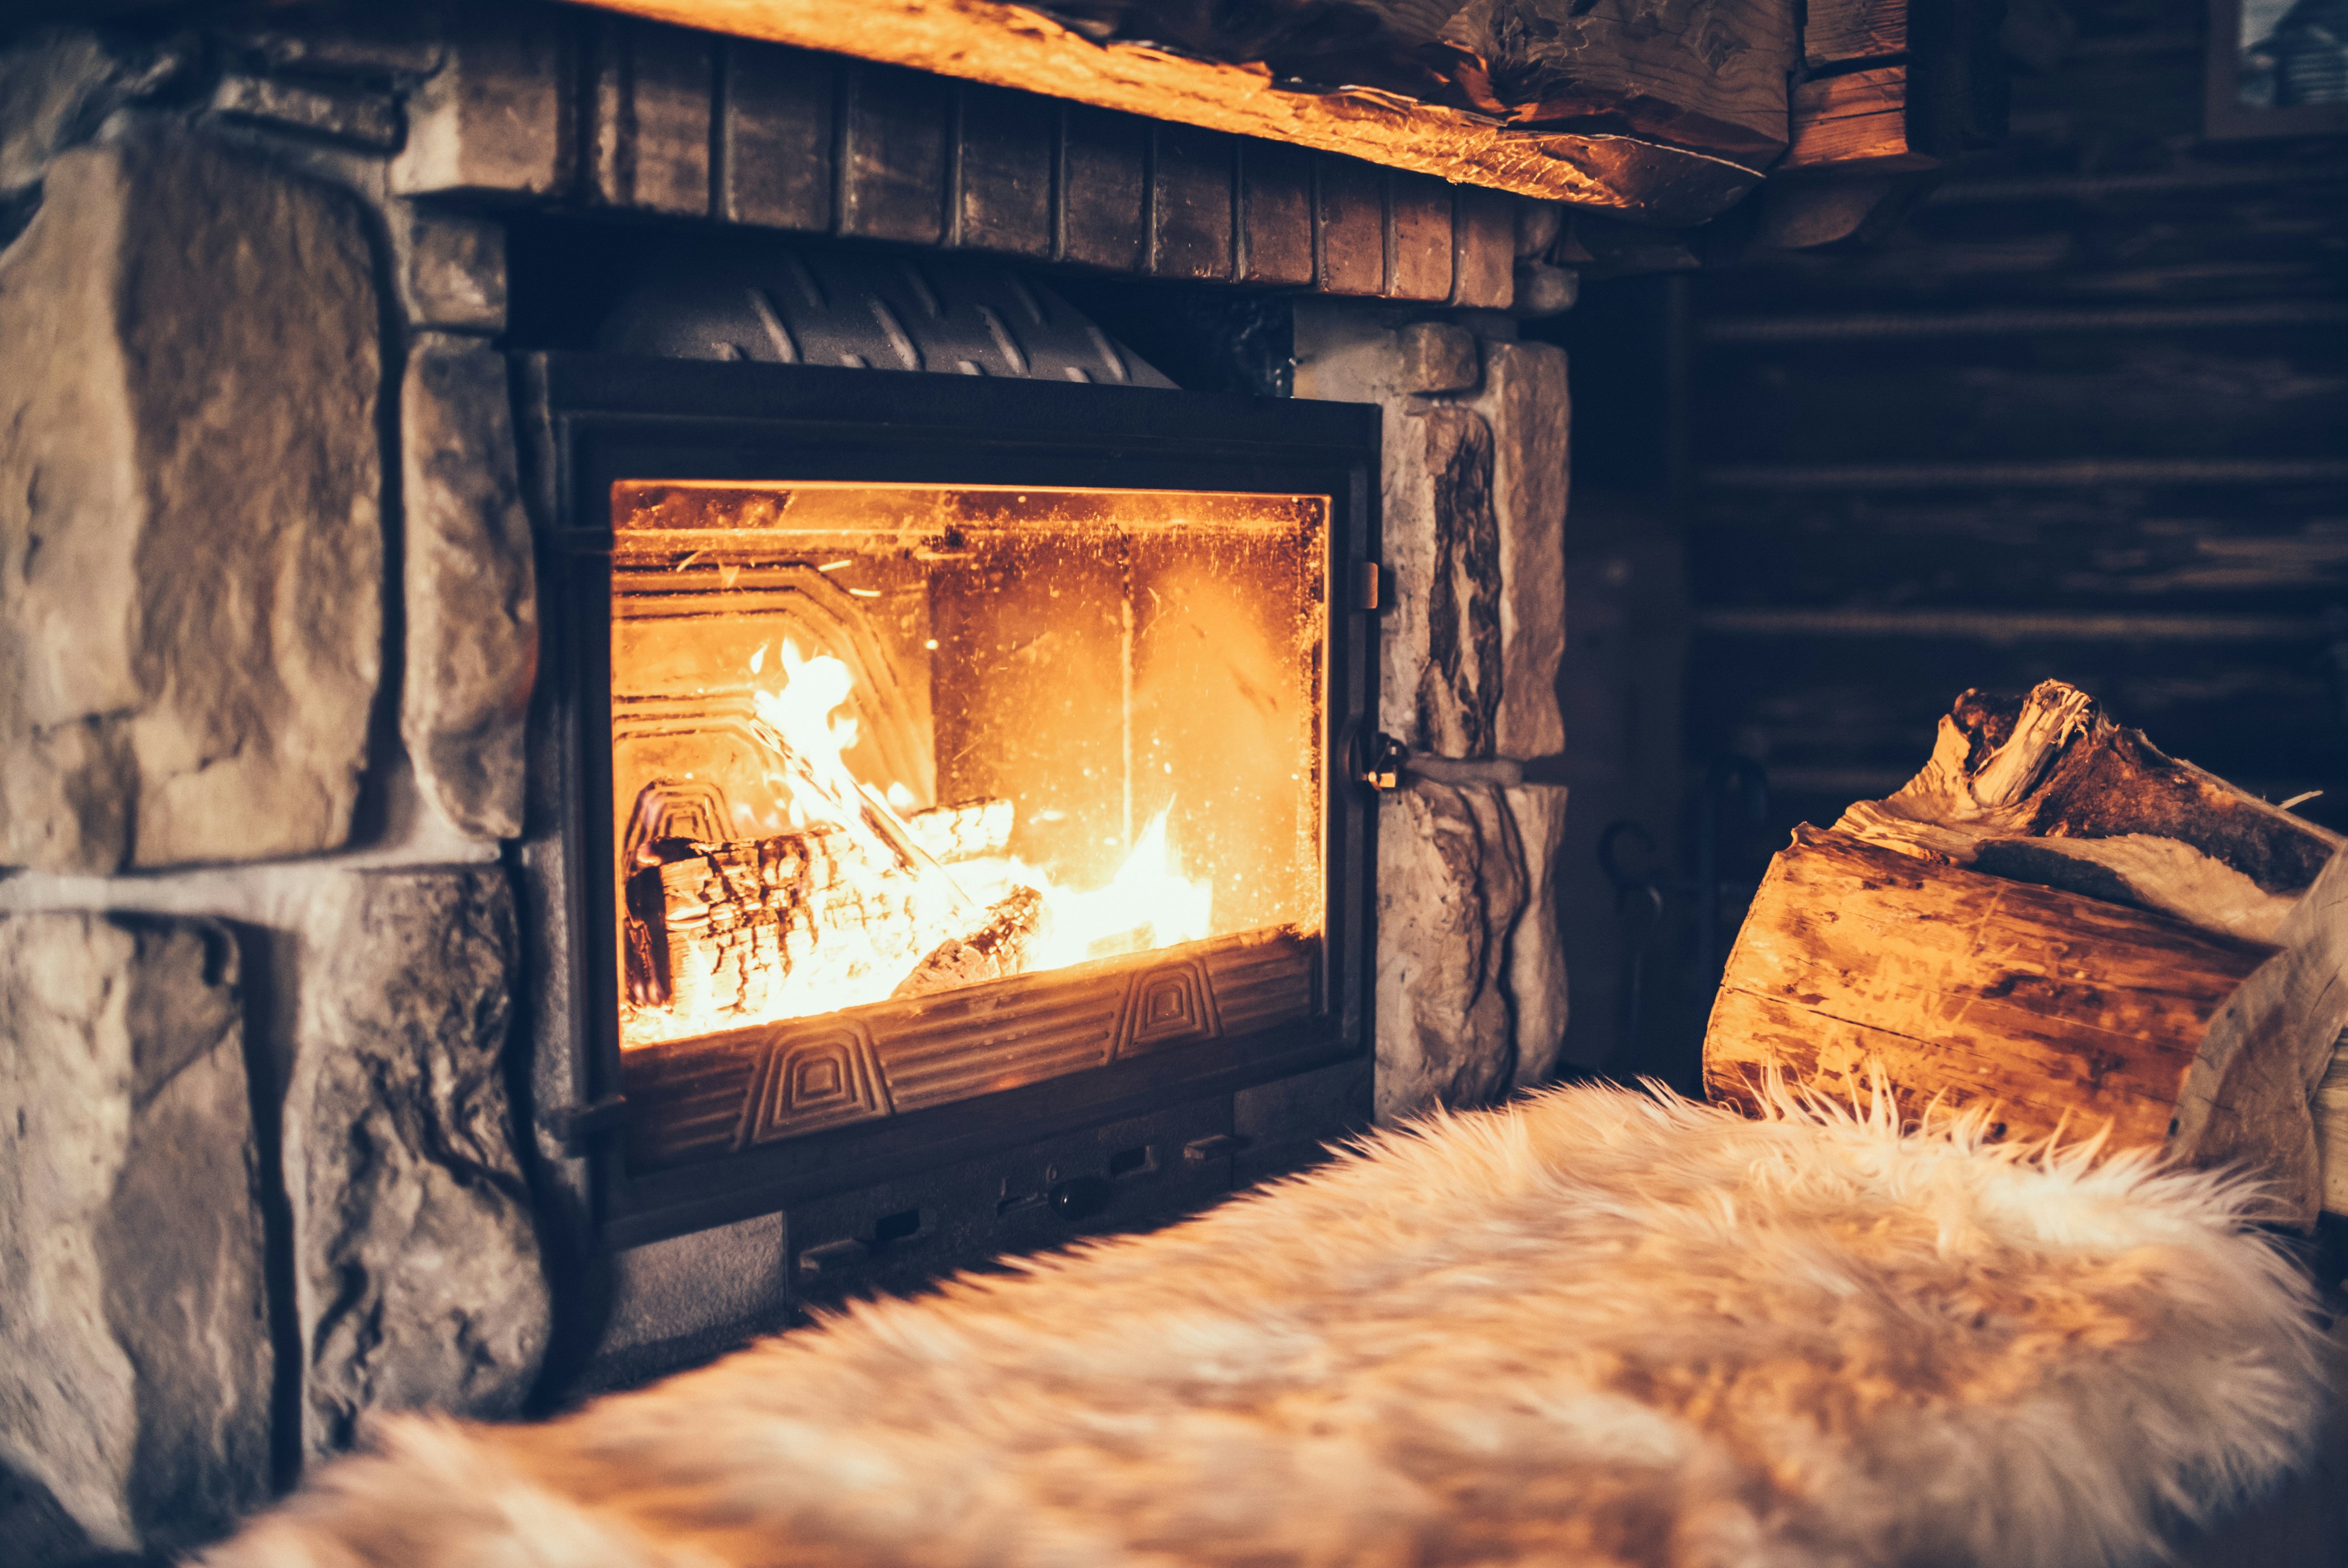 Tips to Enjoy Your Fireplace this Holiday Season  Regency